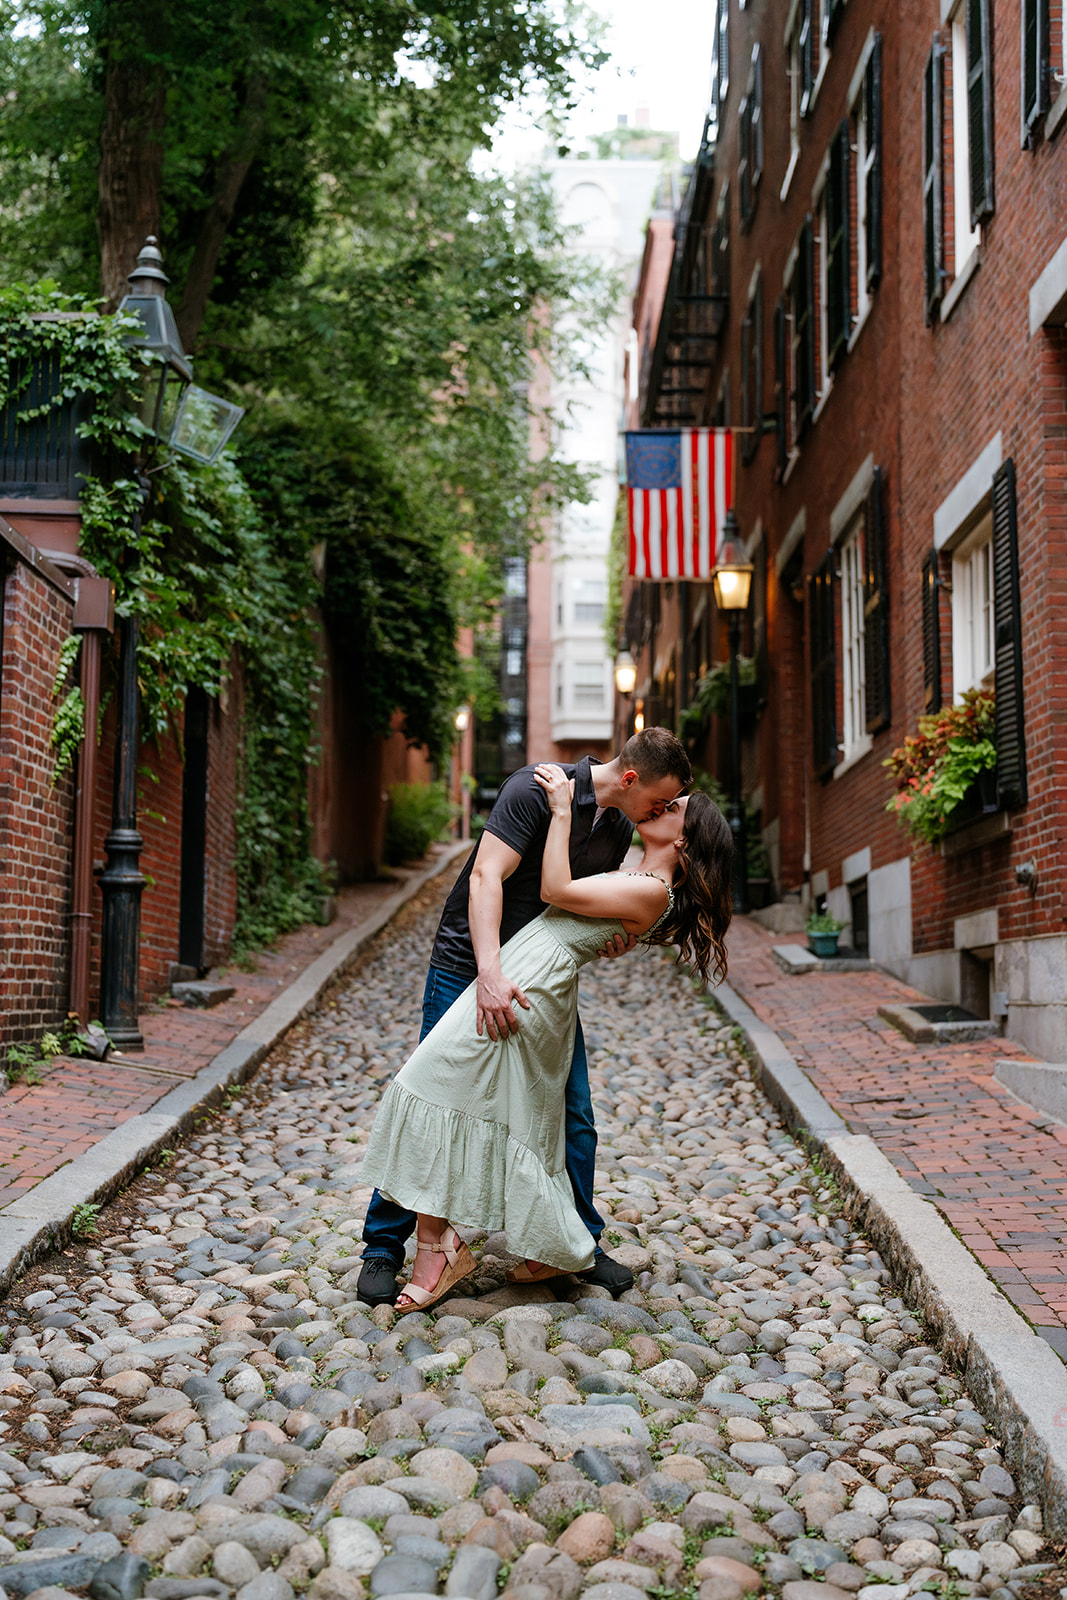 A couple kissing in a cobblestone alley with brick buildings and an american flag in the background on the streets of beacon hill 